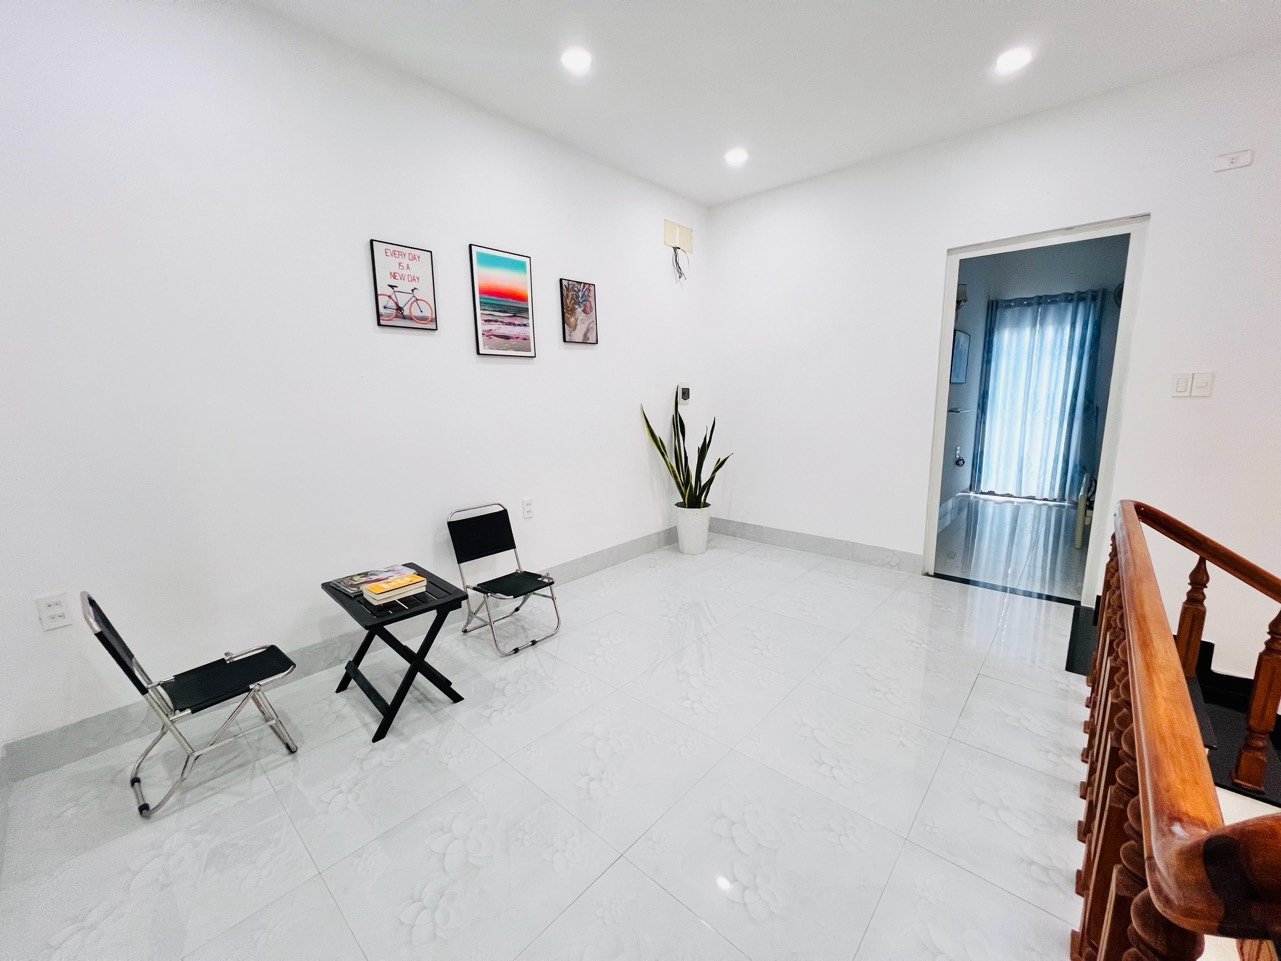 House for rent in Nha Trang | 3 bedrooms | in Mỹ Gia | 17 million